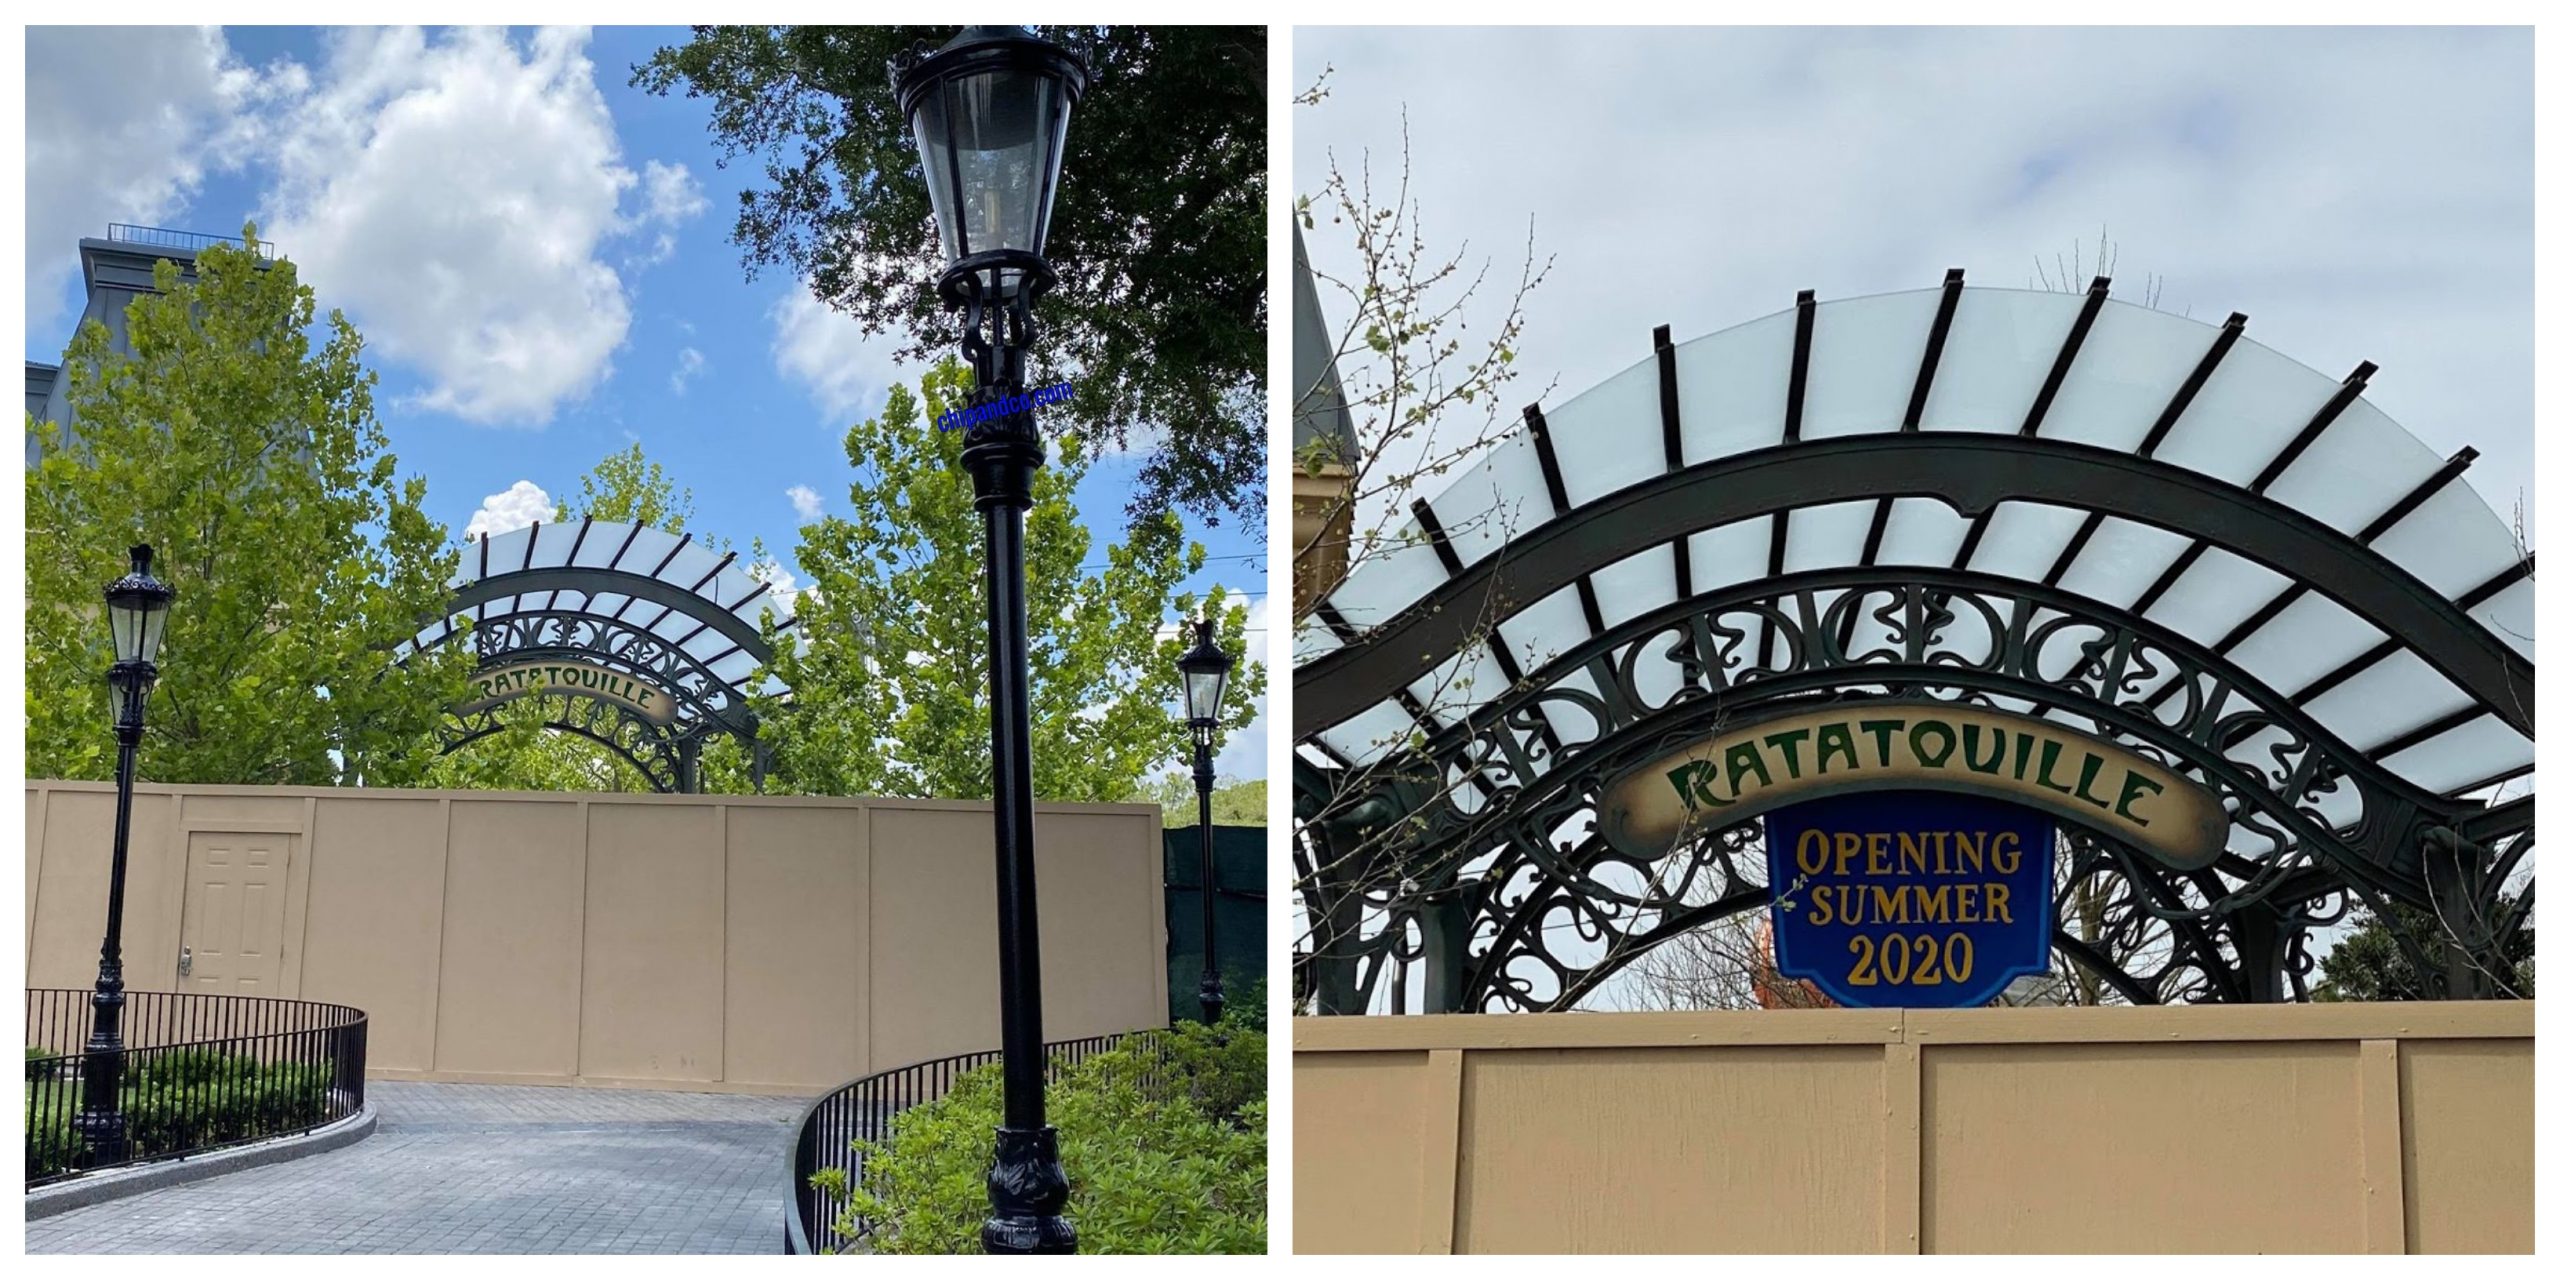 Remy’s Ratatouille Adventure Changes Opening Date From Summer To Coming Soon